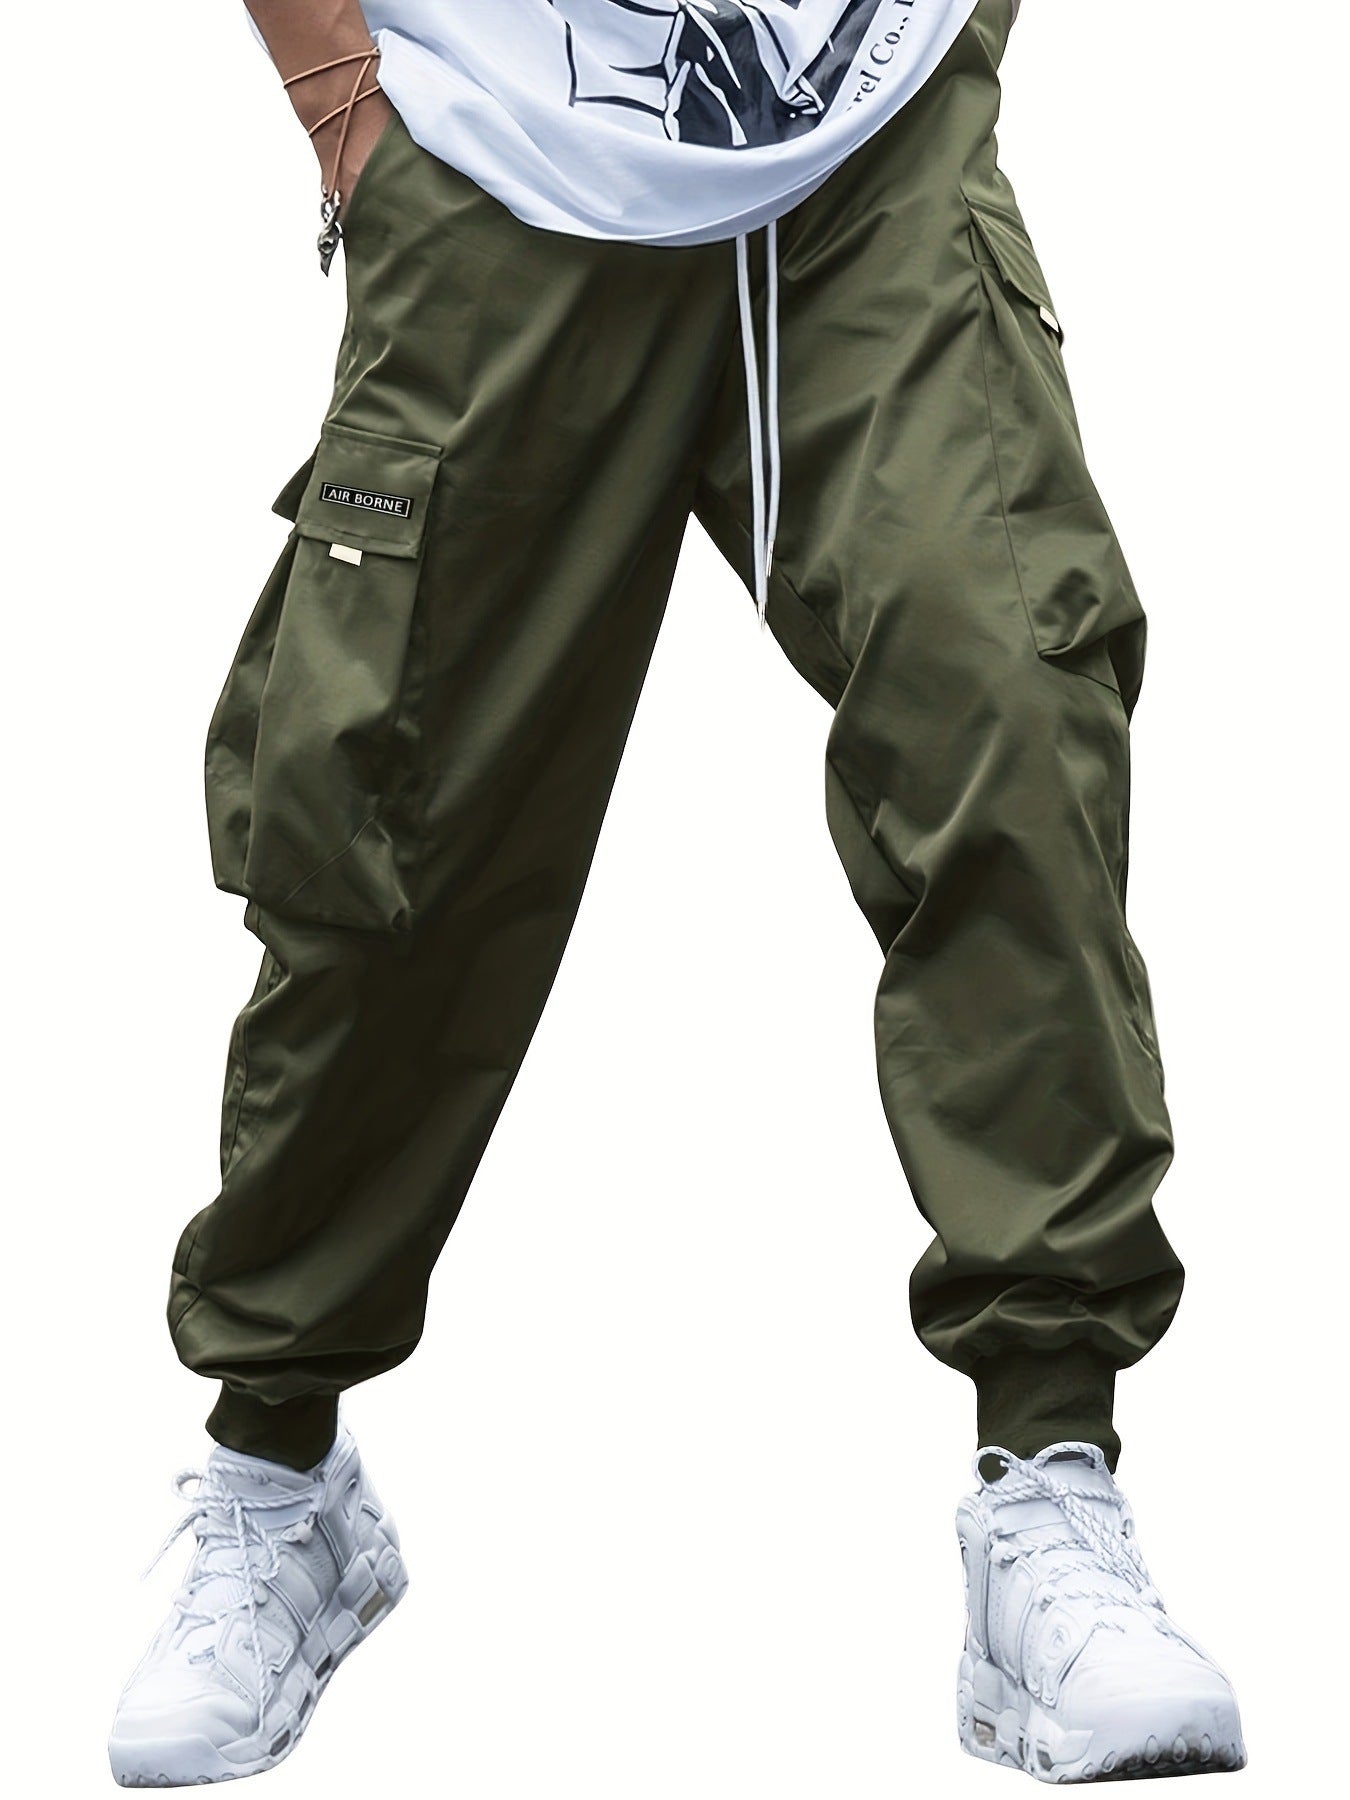 Army Green - Oversized Cargo Multi-pocket Men's Pants - mens pants at TFC&H Co.